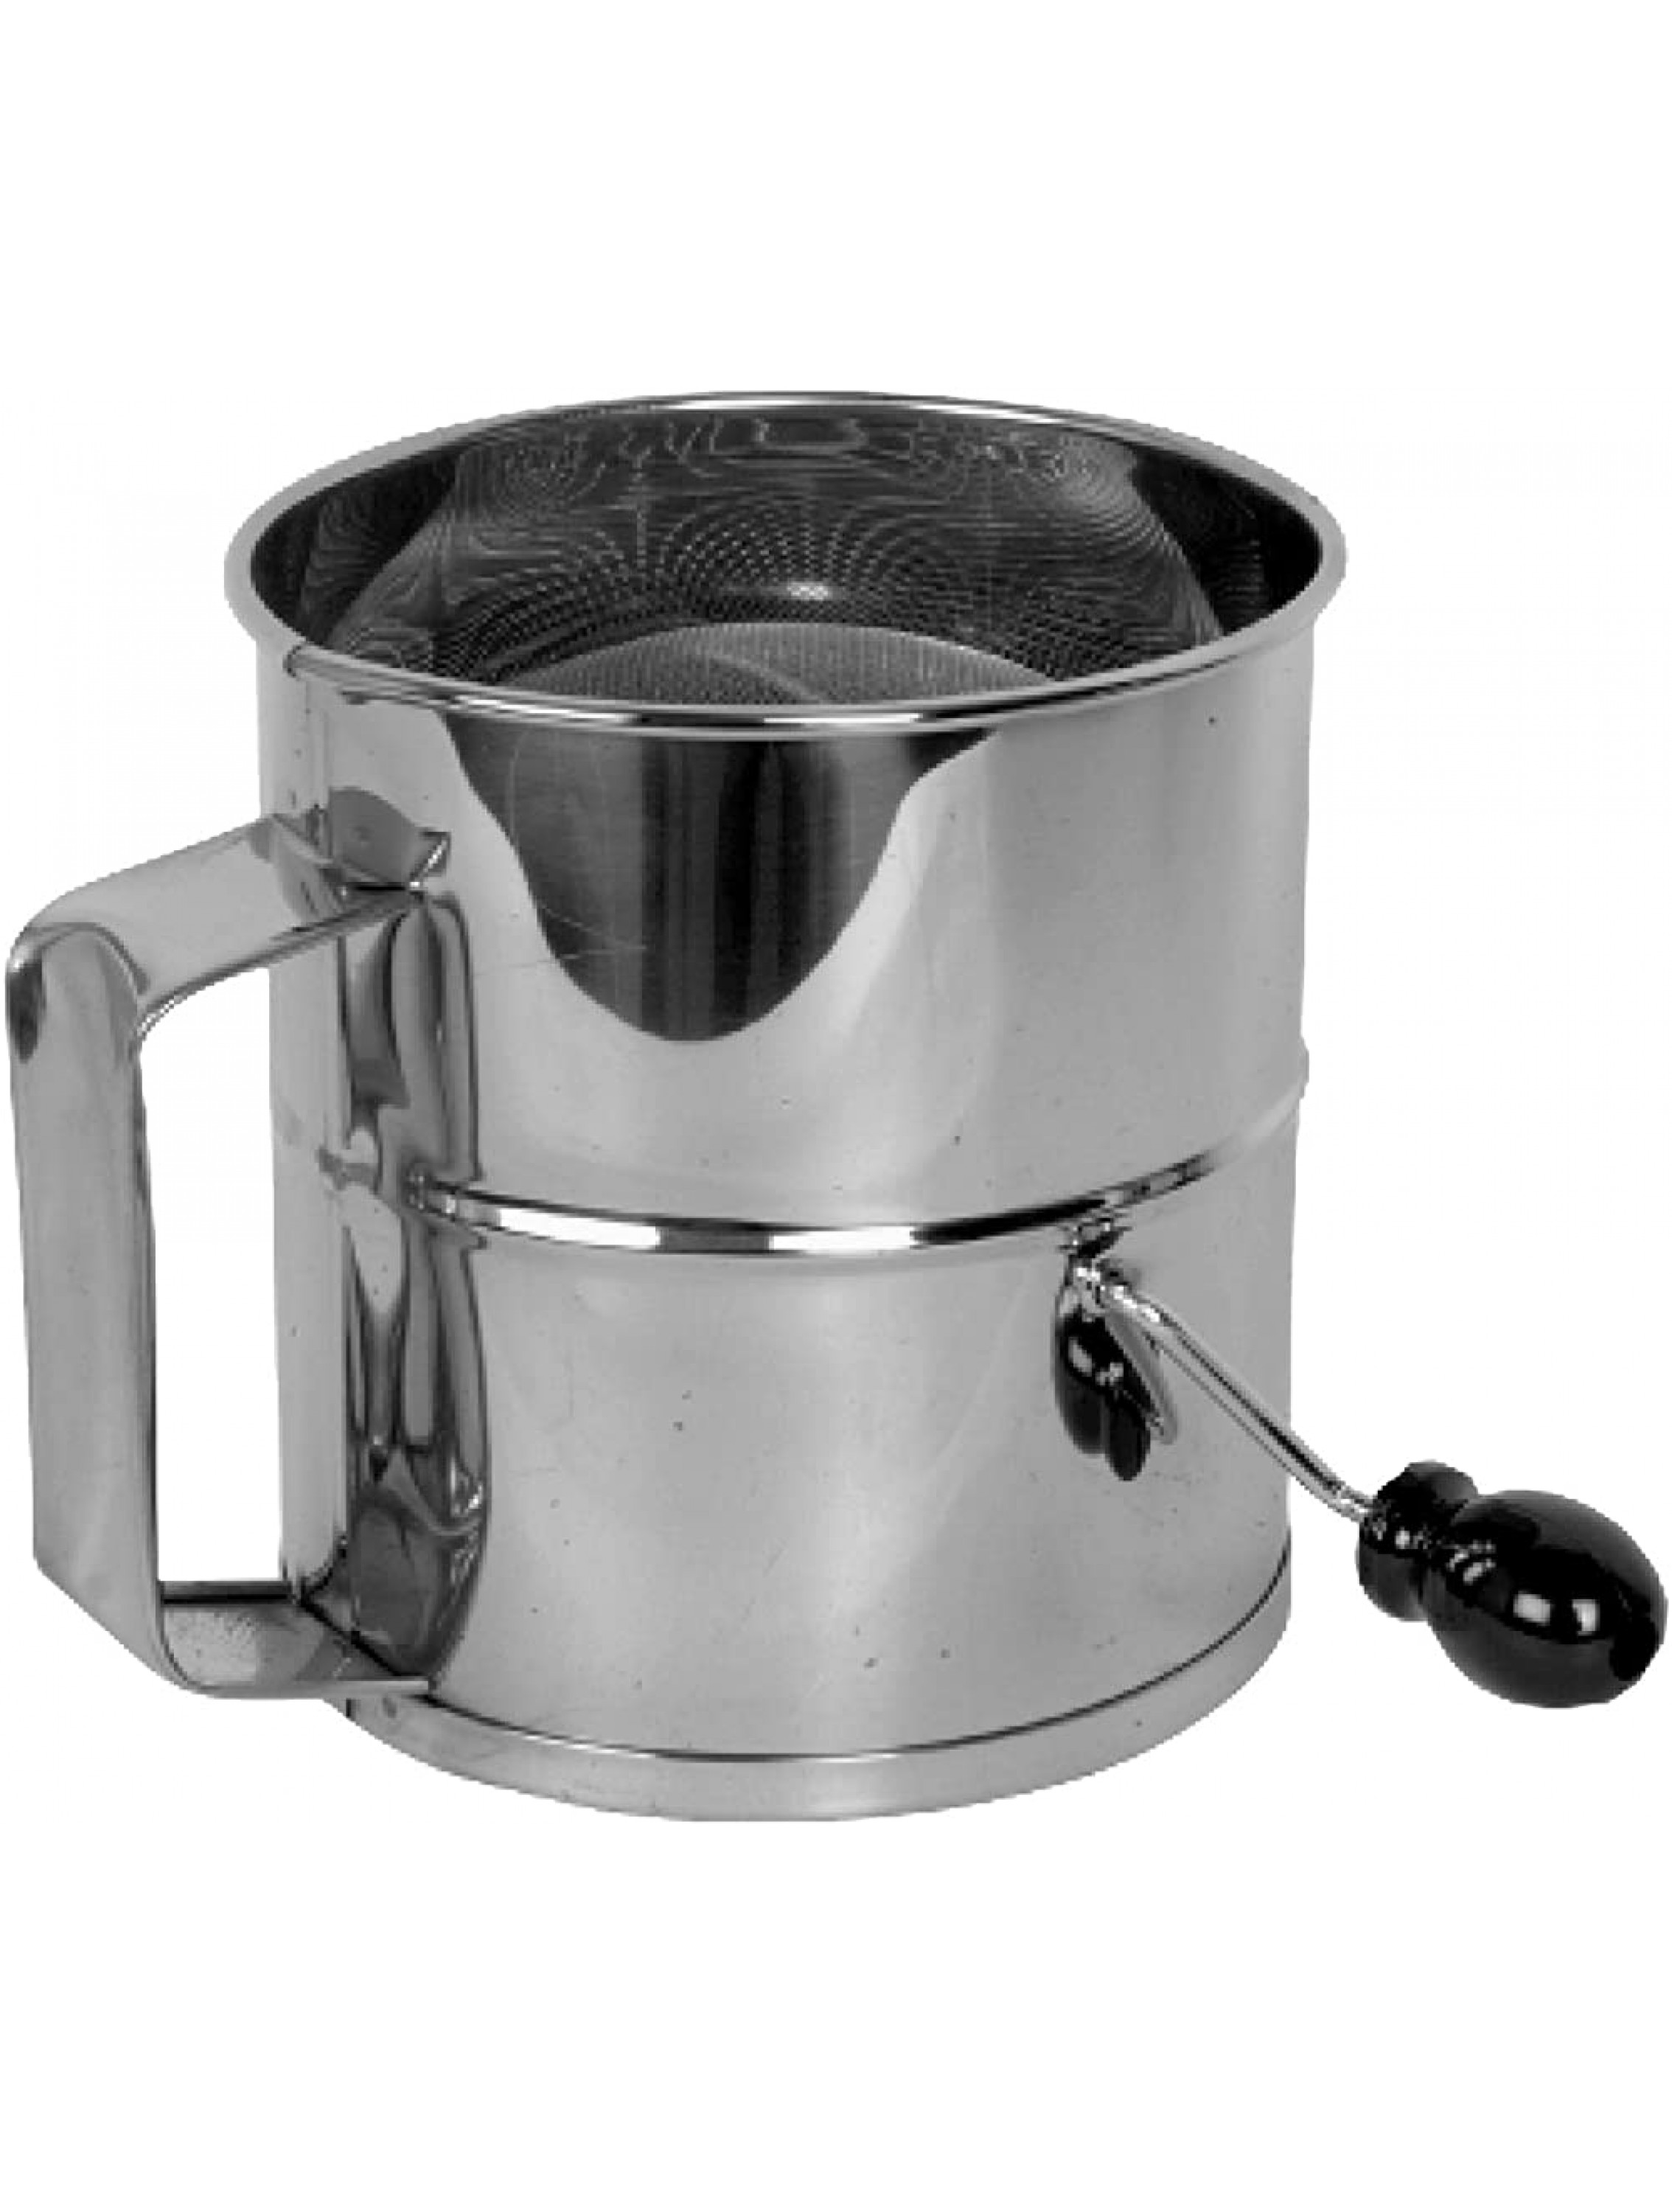 Thunder Group 8 Cup Flour Sifter - BW3TEFP5H